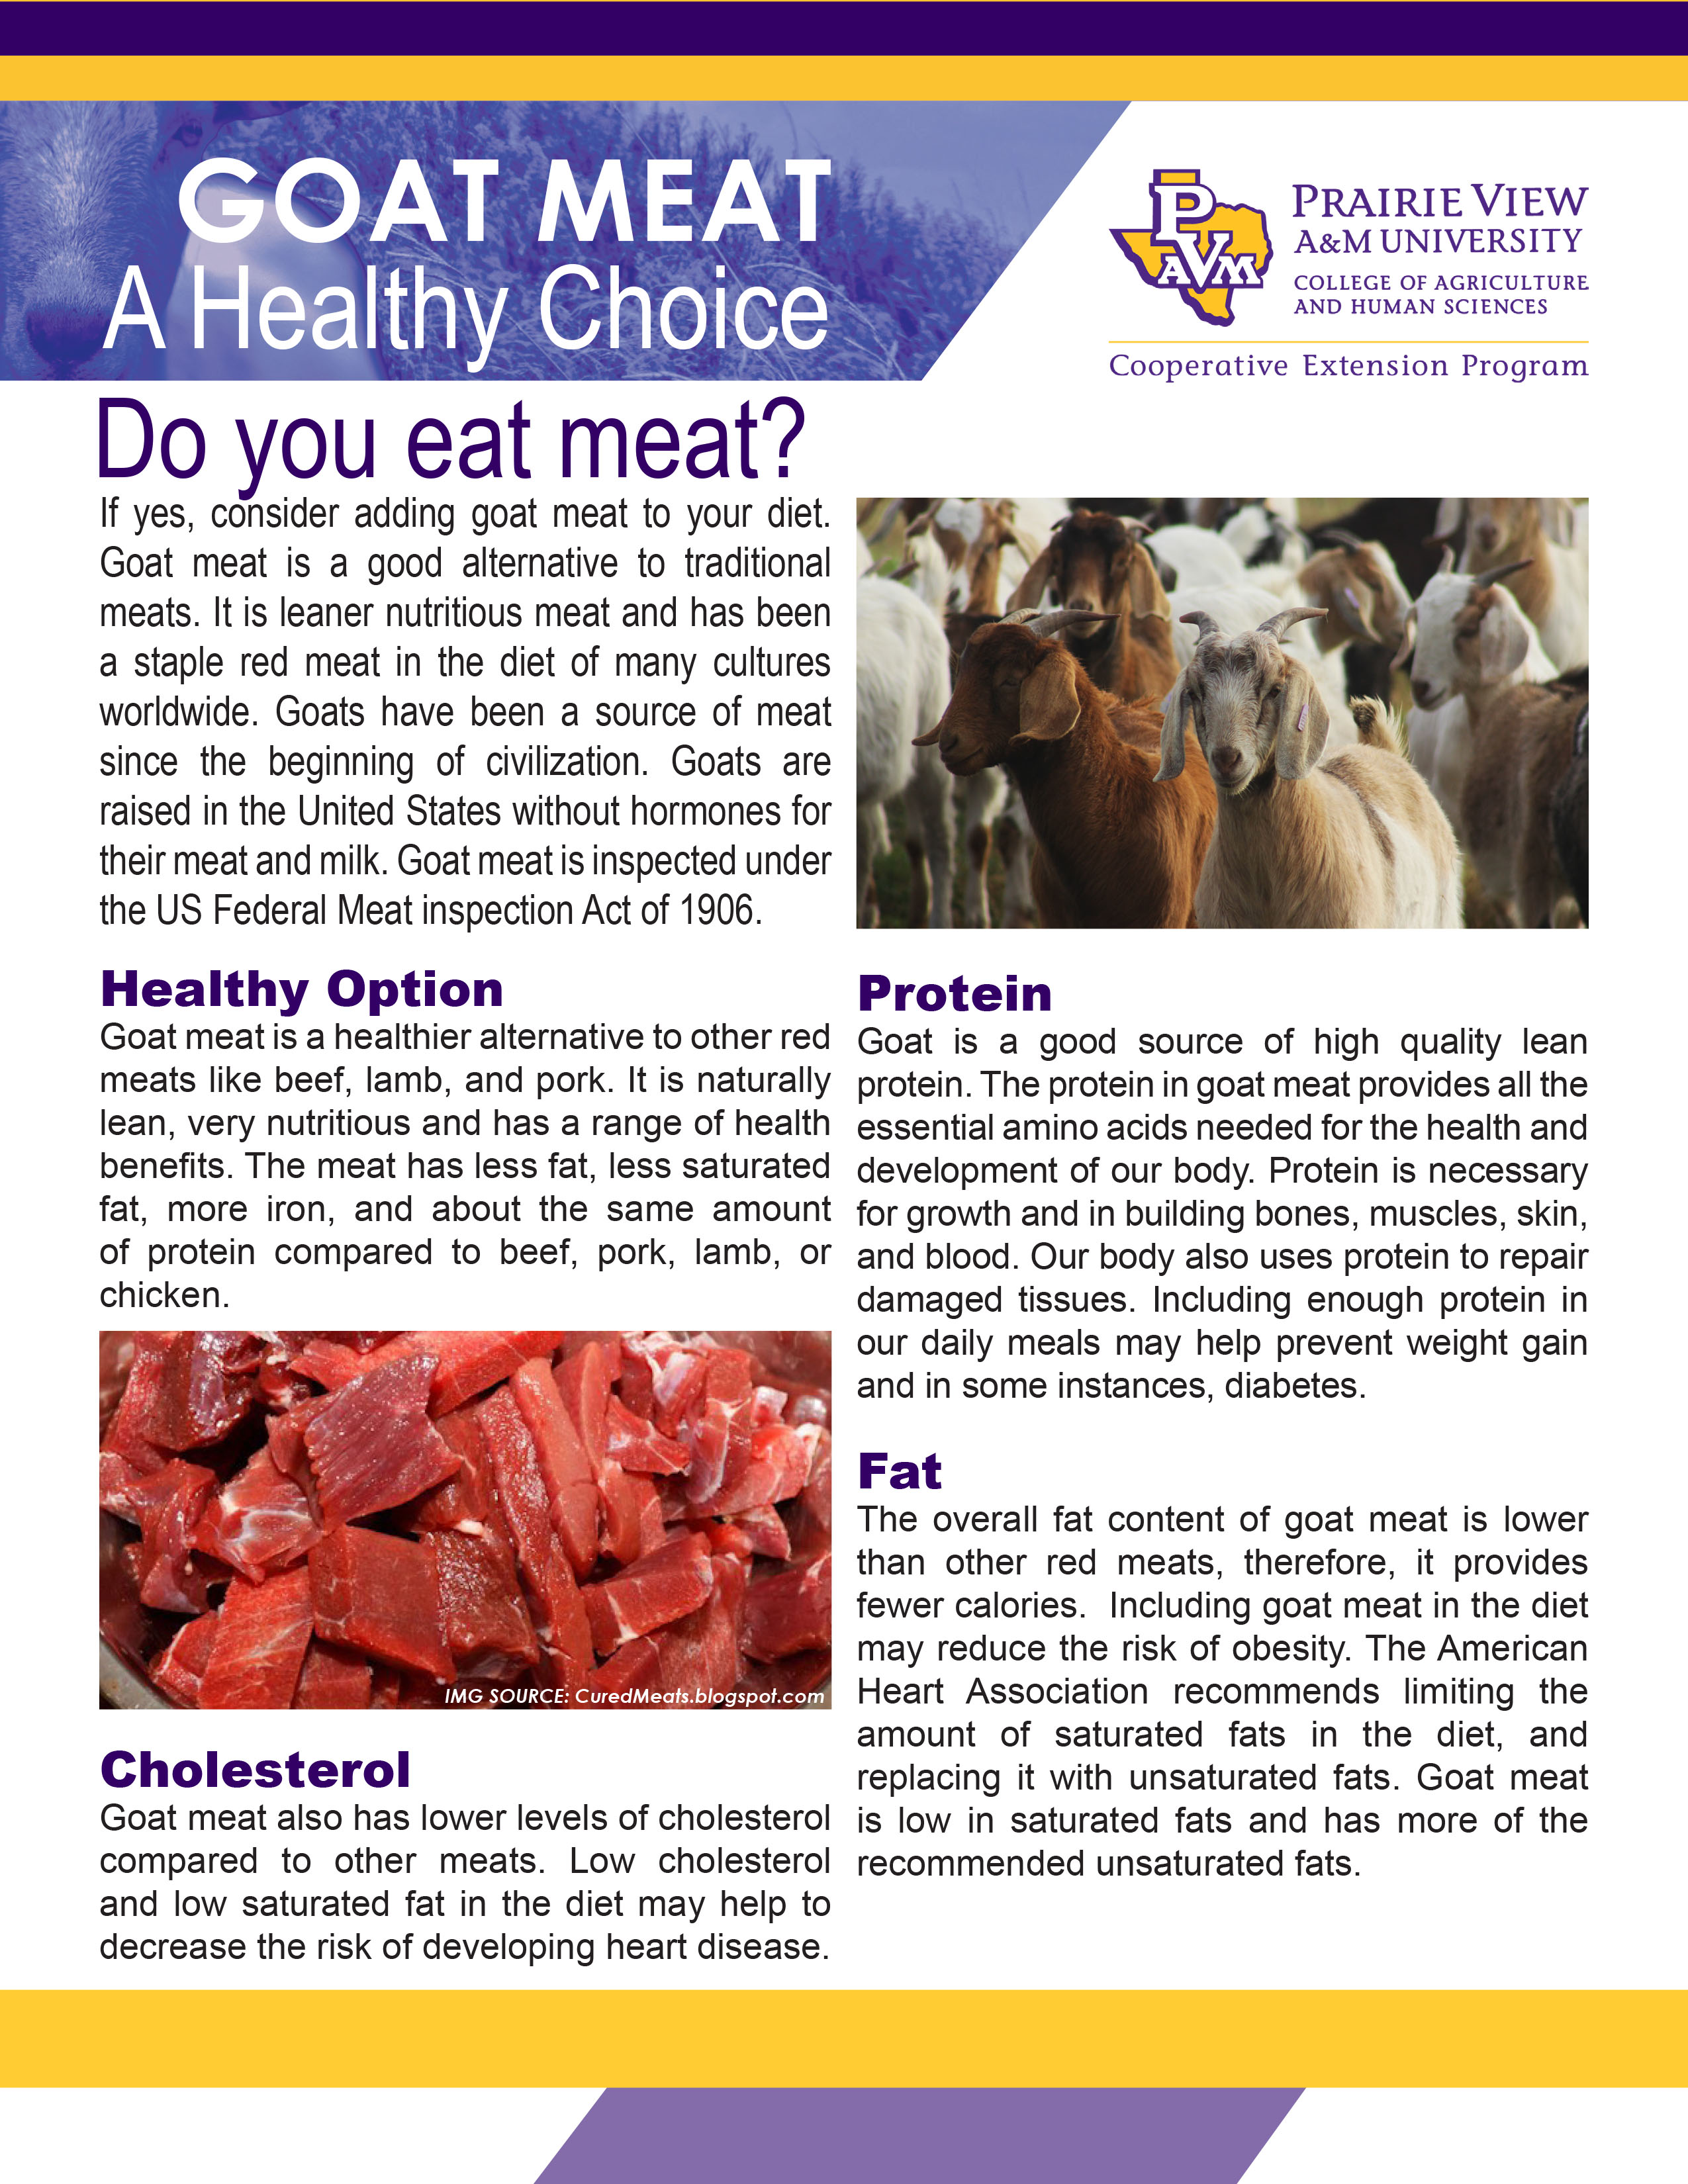 Goat Meat, A Healthy Choice